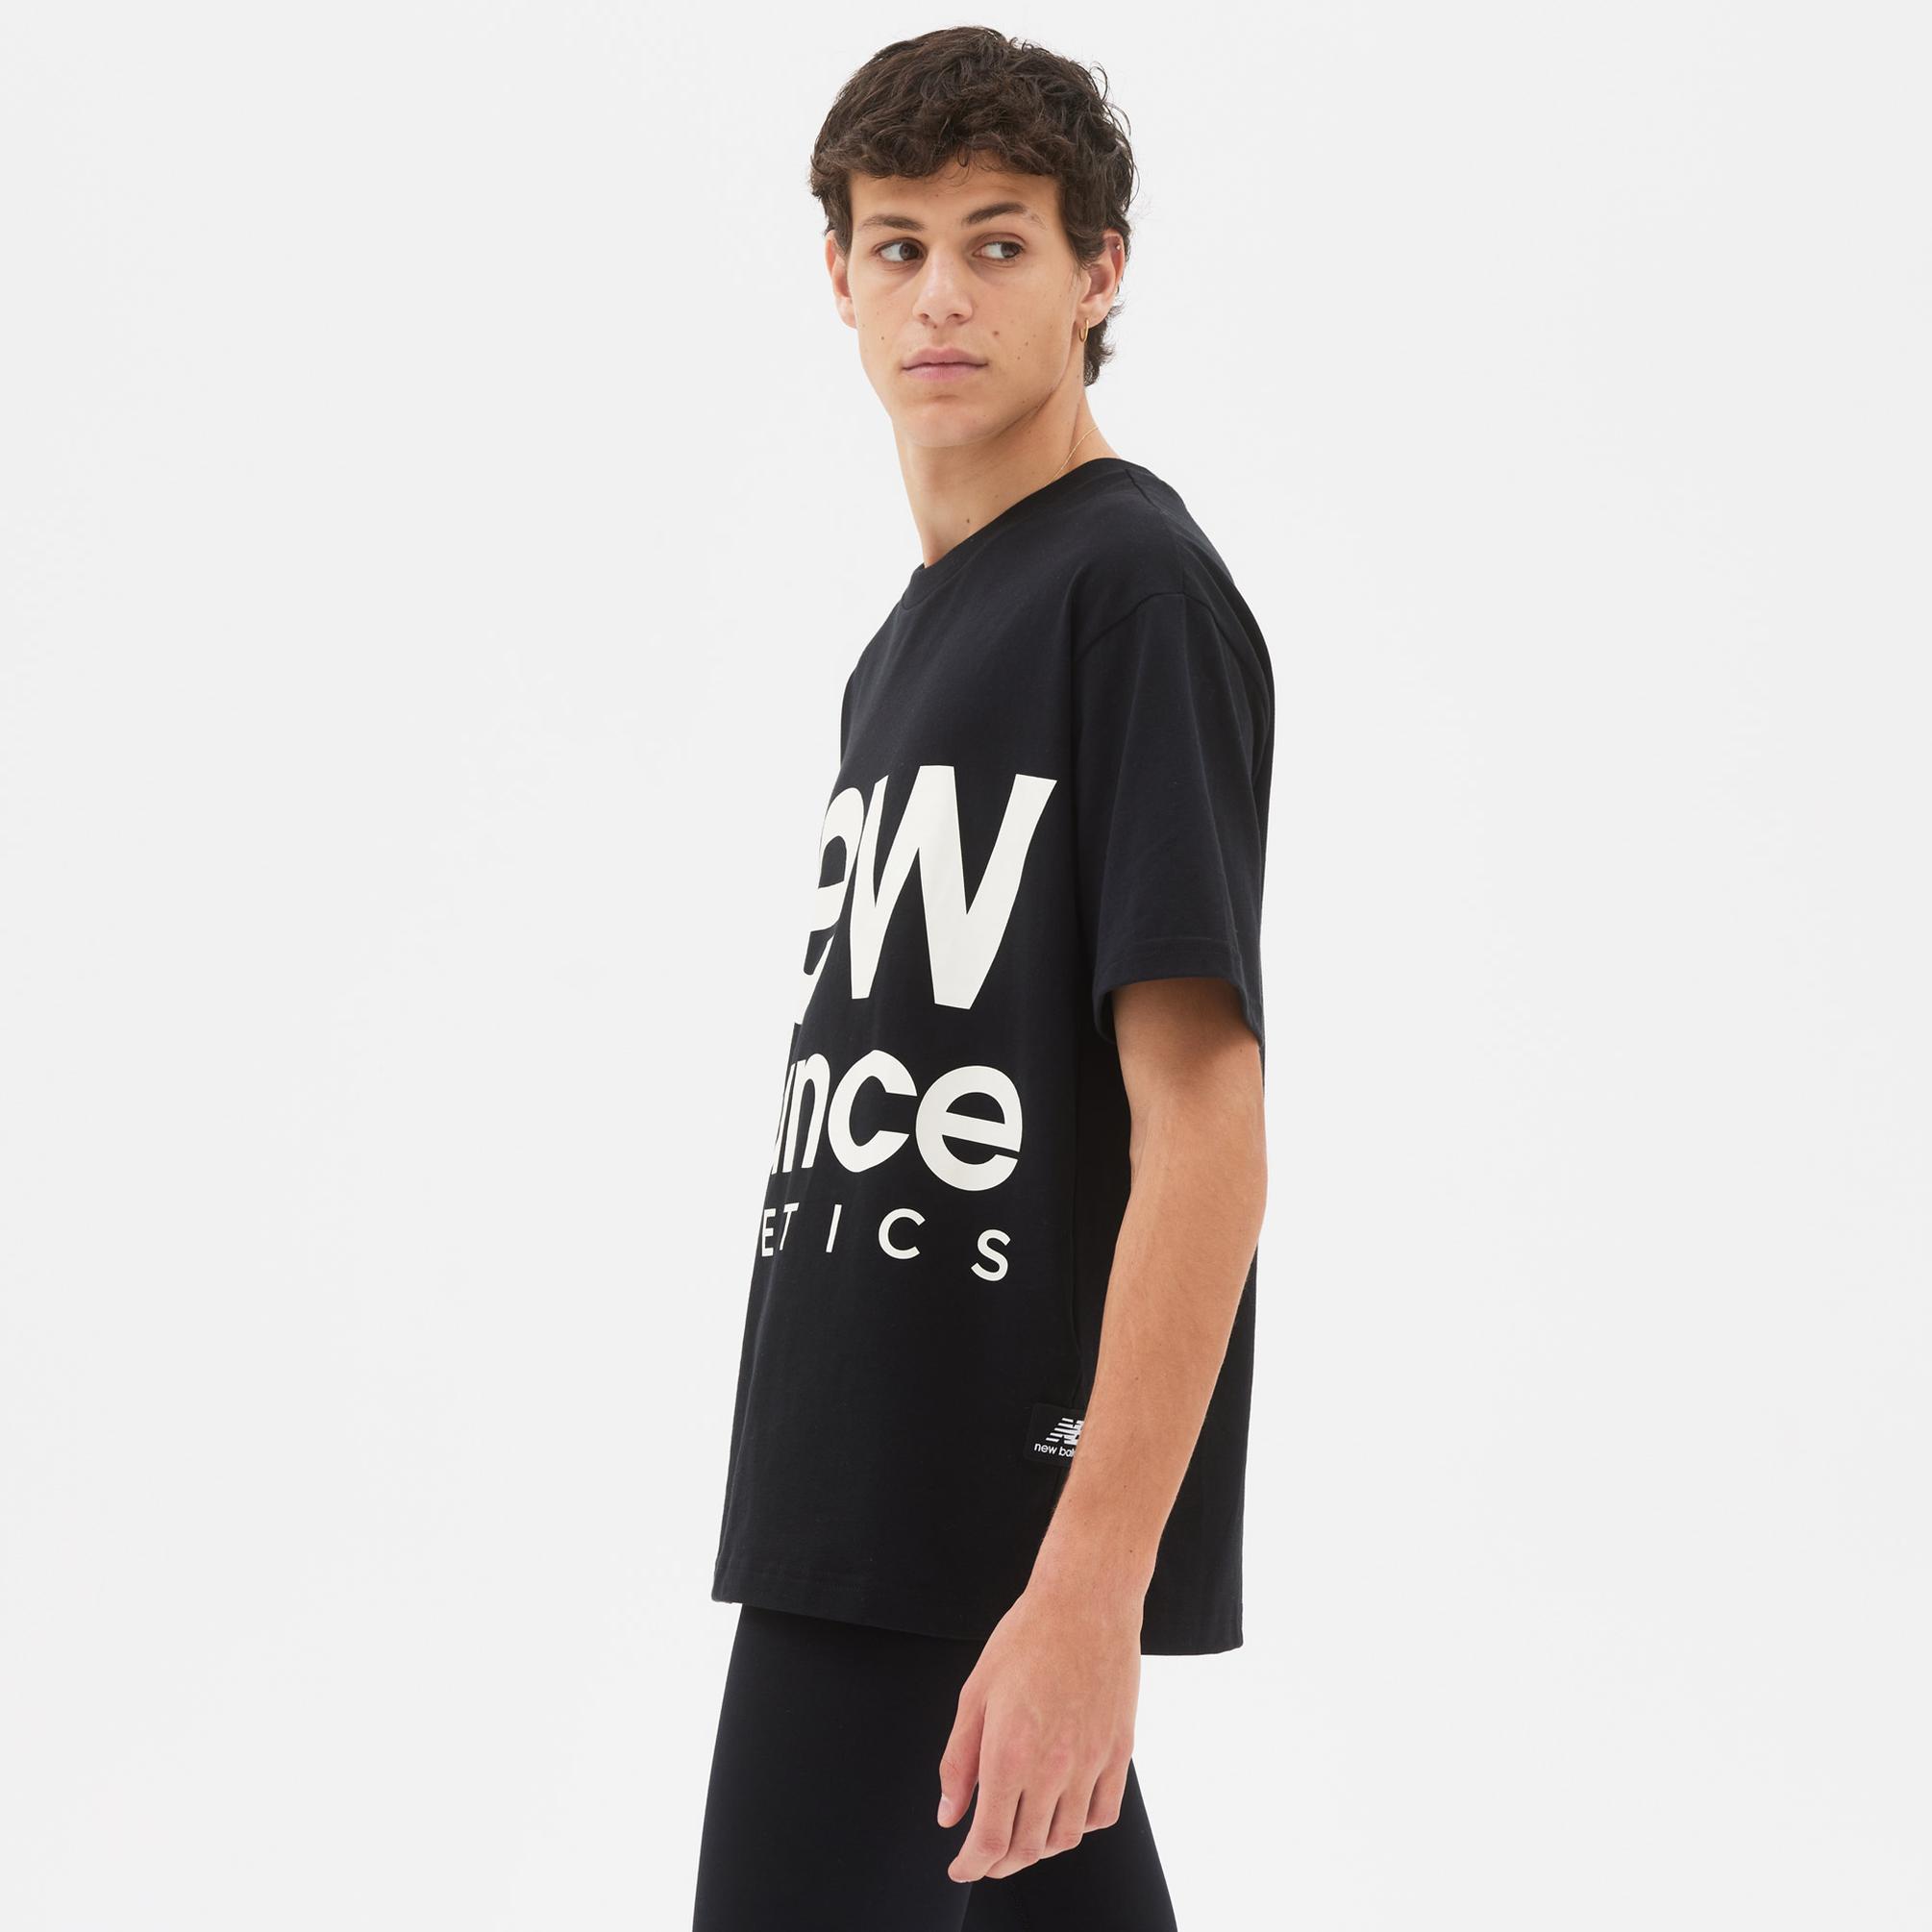  New Balance Out of Bounds Unisex Siyah T-Shirt